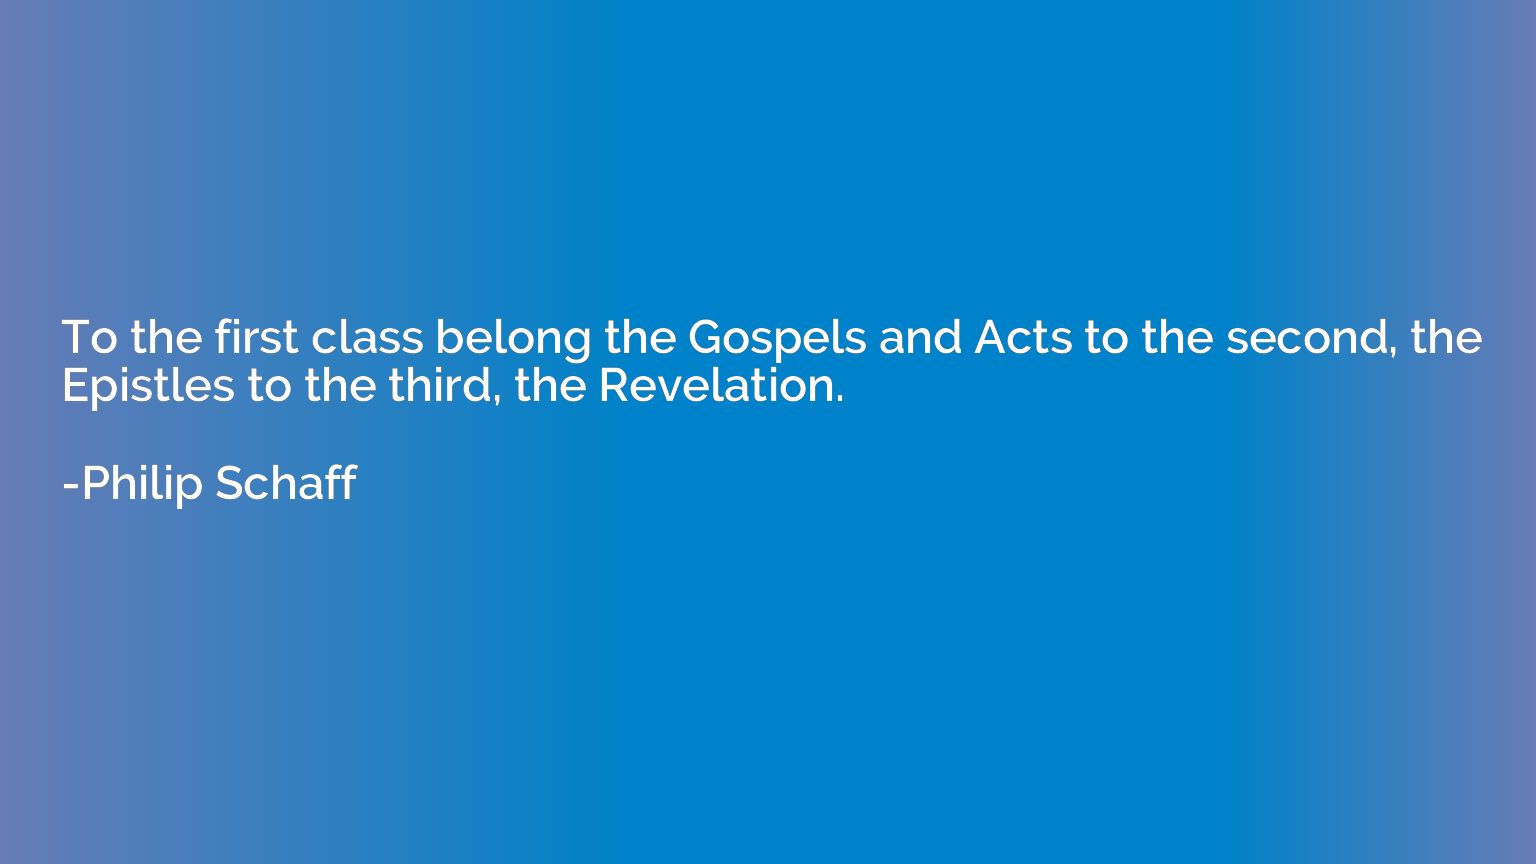 To the first class belong the Gospels and Acts to the second